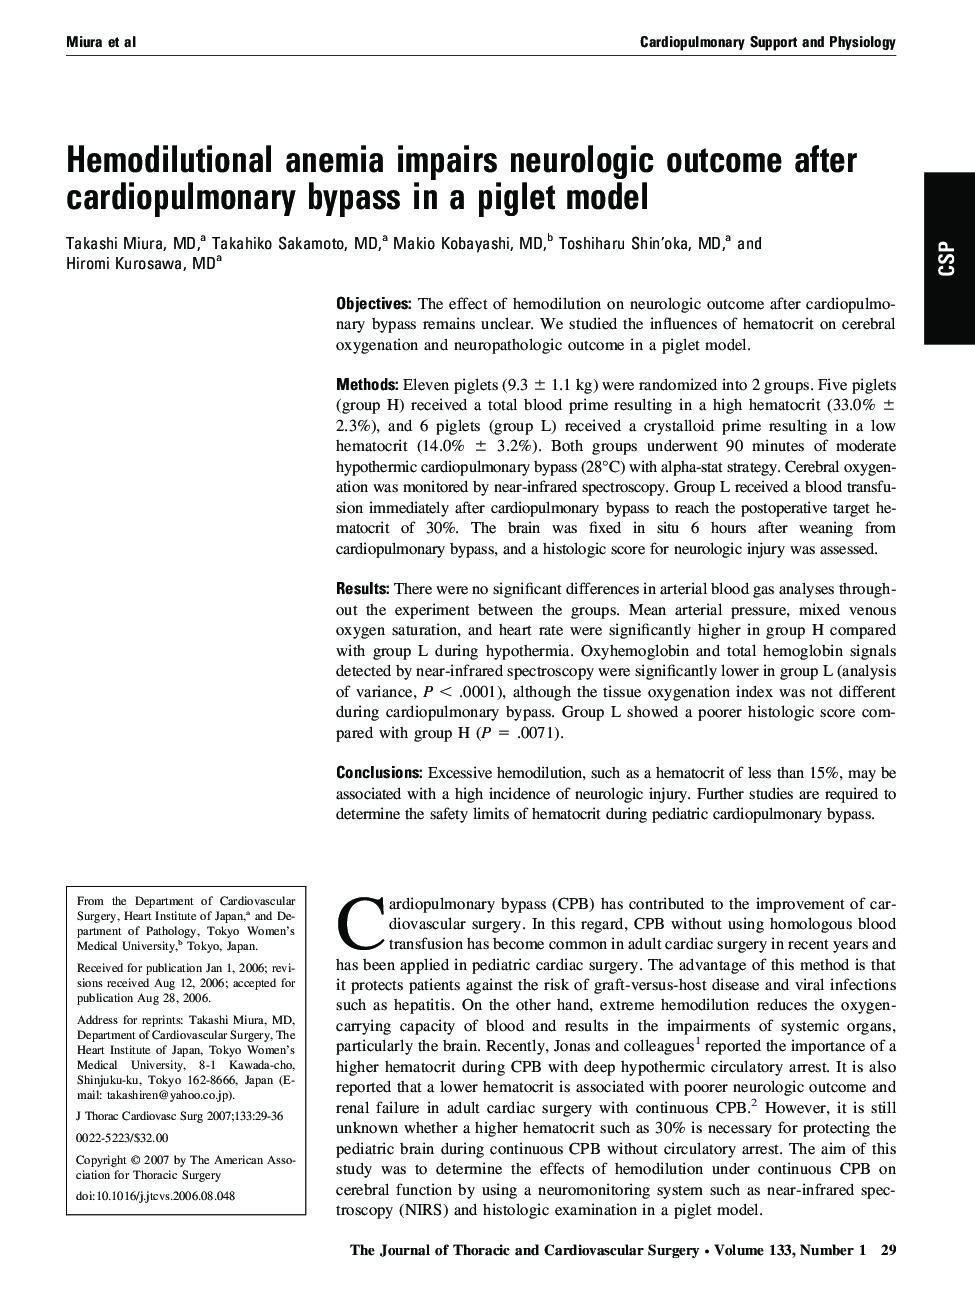 Hemodilutional anemia impairs neurologic outcome after cardiopulmonary bypass in a piglet model